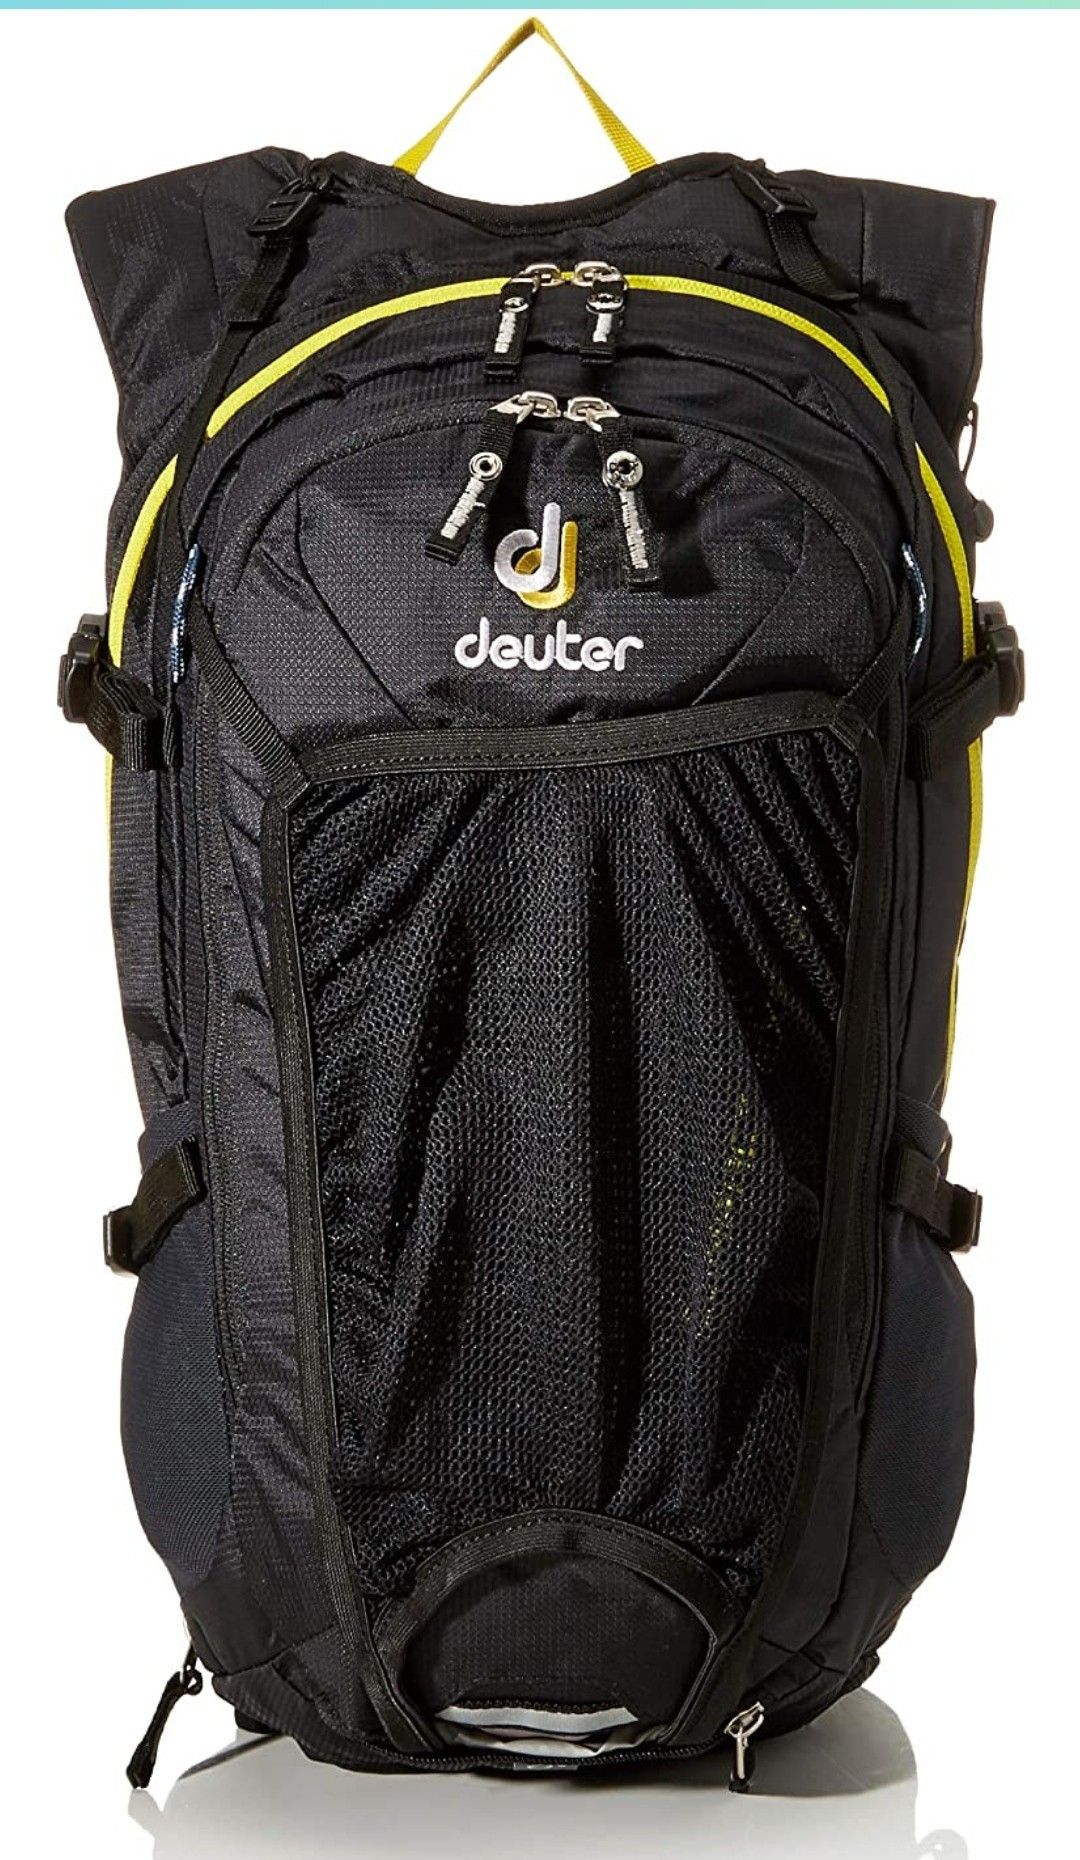 Deuter Compact EXP 12 Biking Backpack with Hydration System